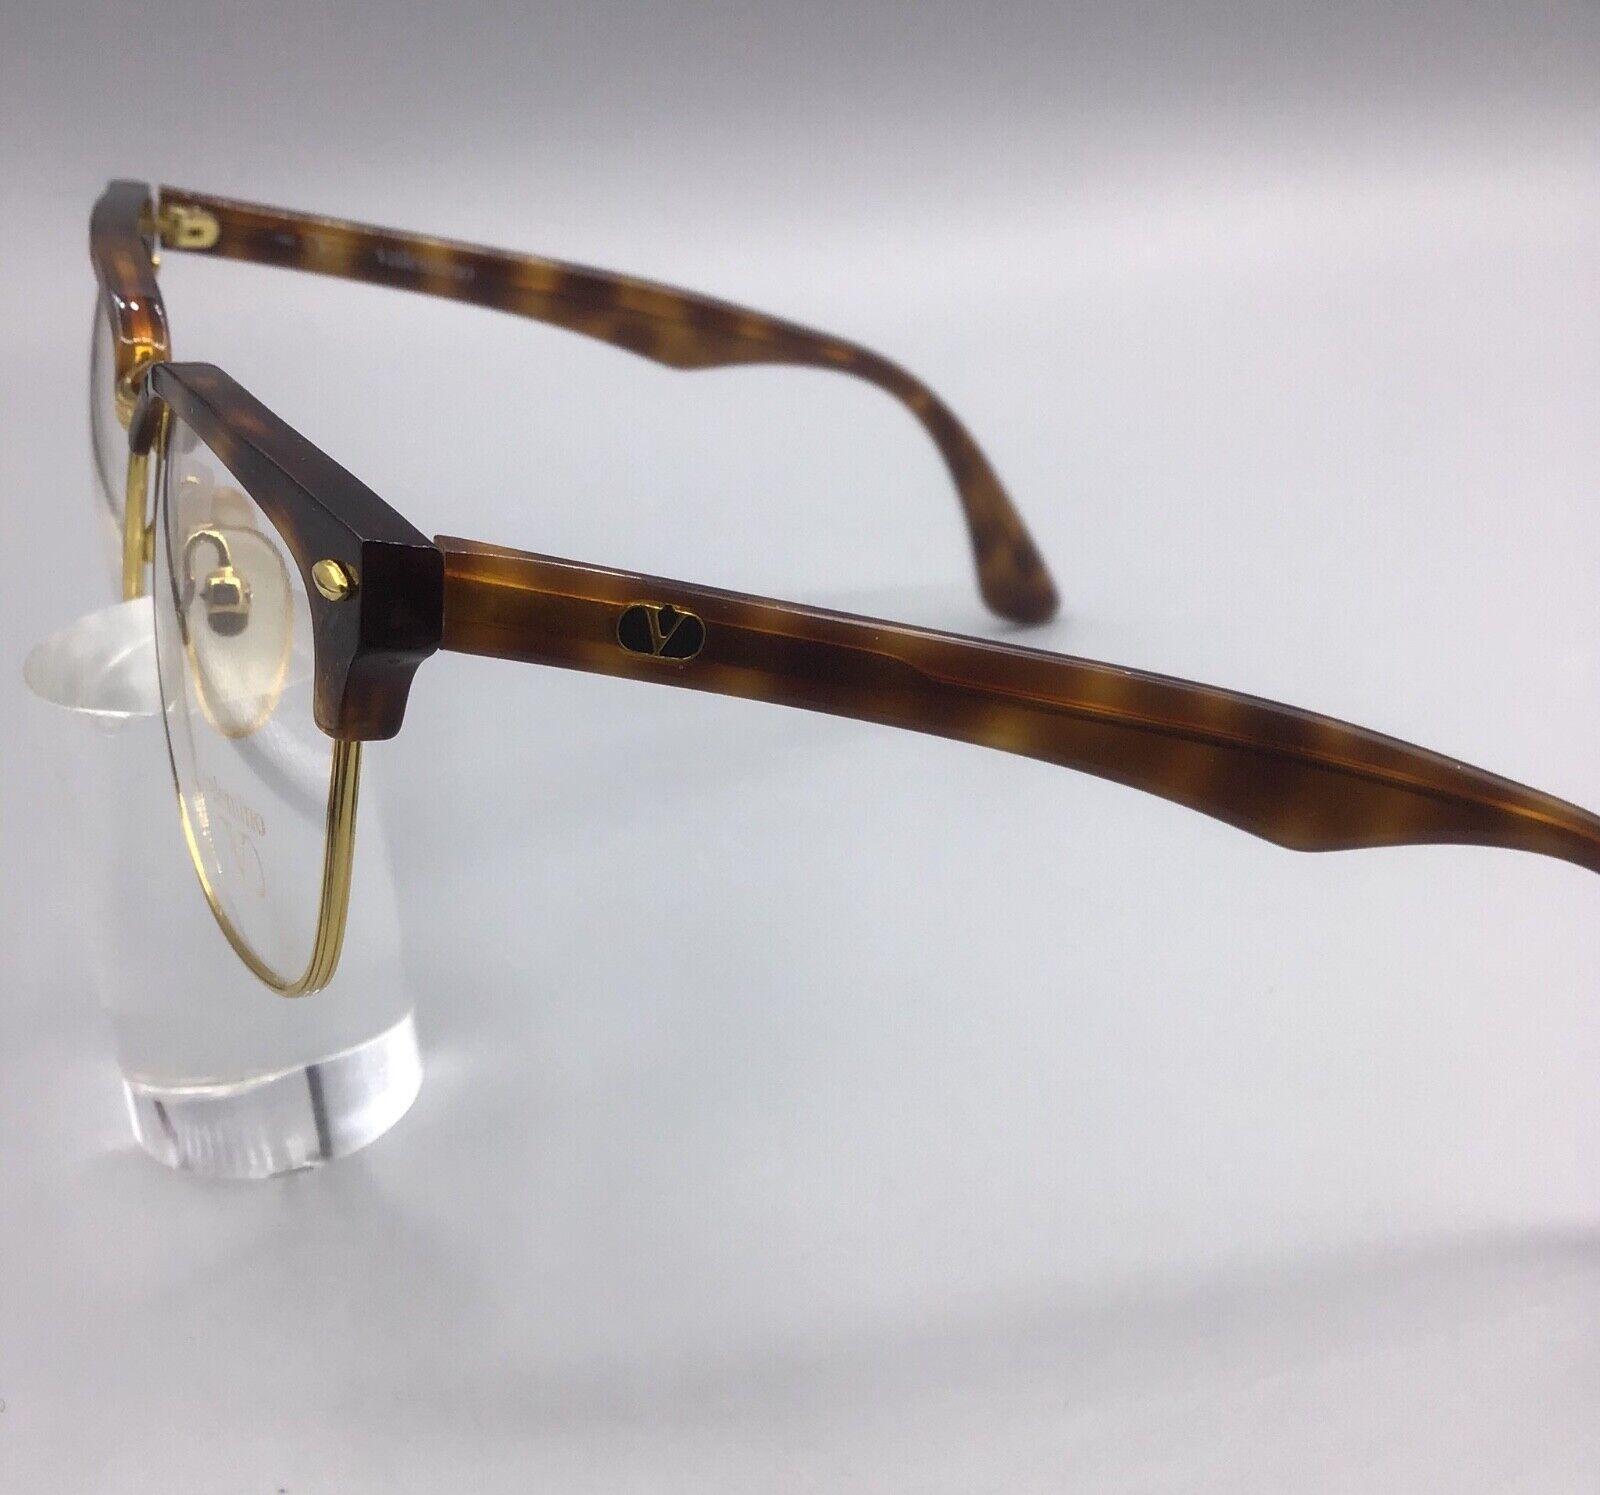 Valentino occhiale vintage VG11 F1 Made in Italy brillen lunettes